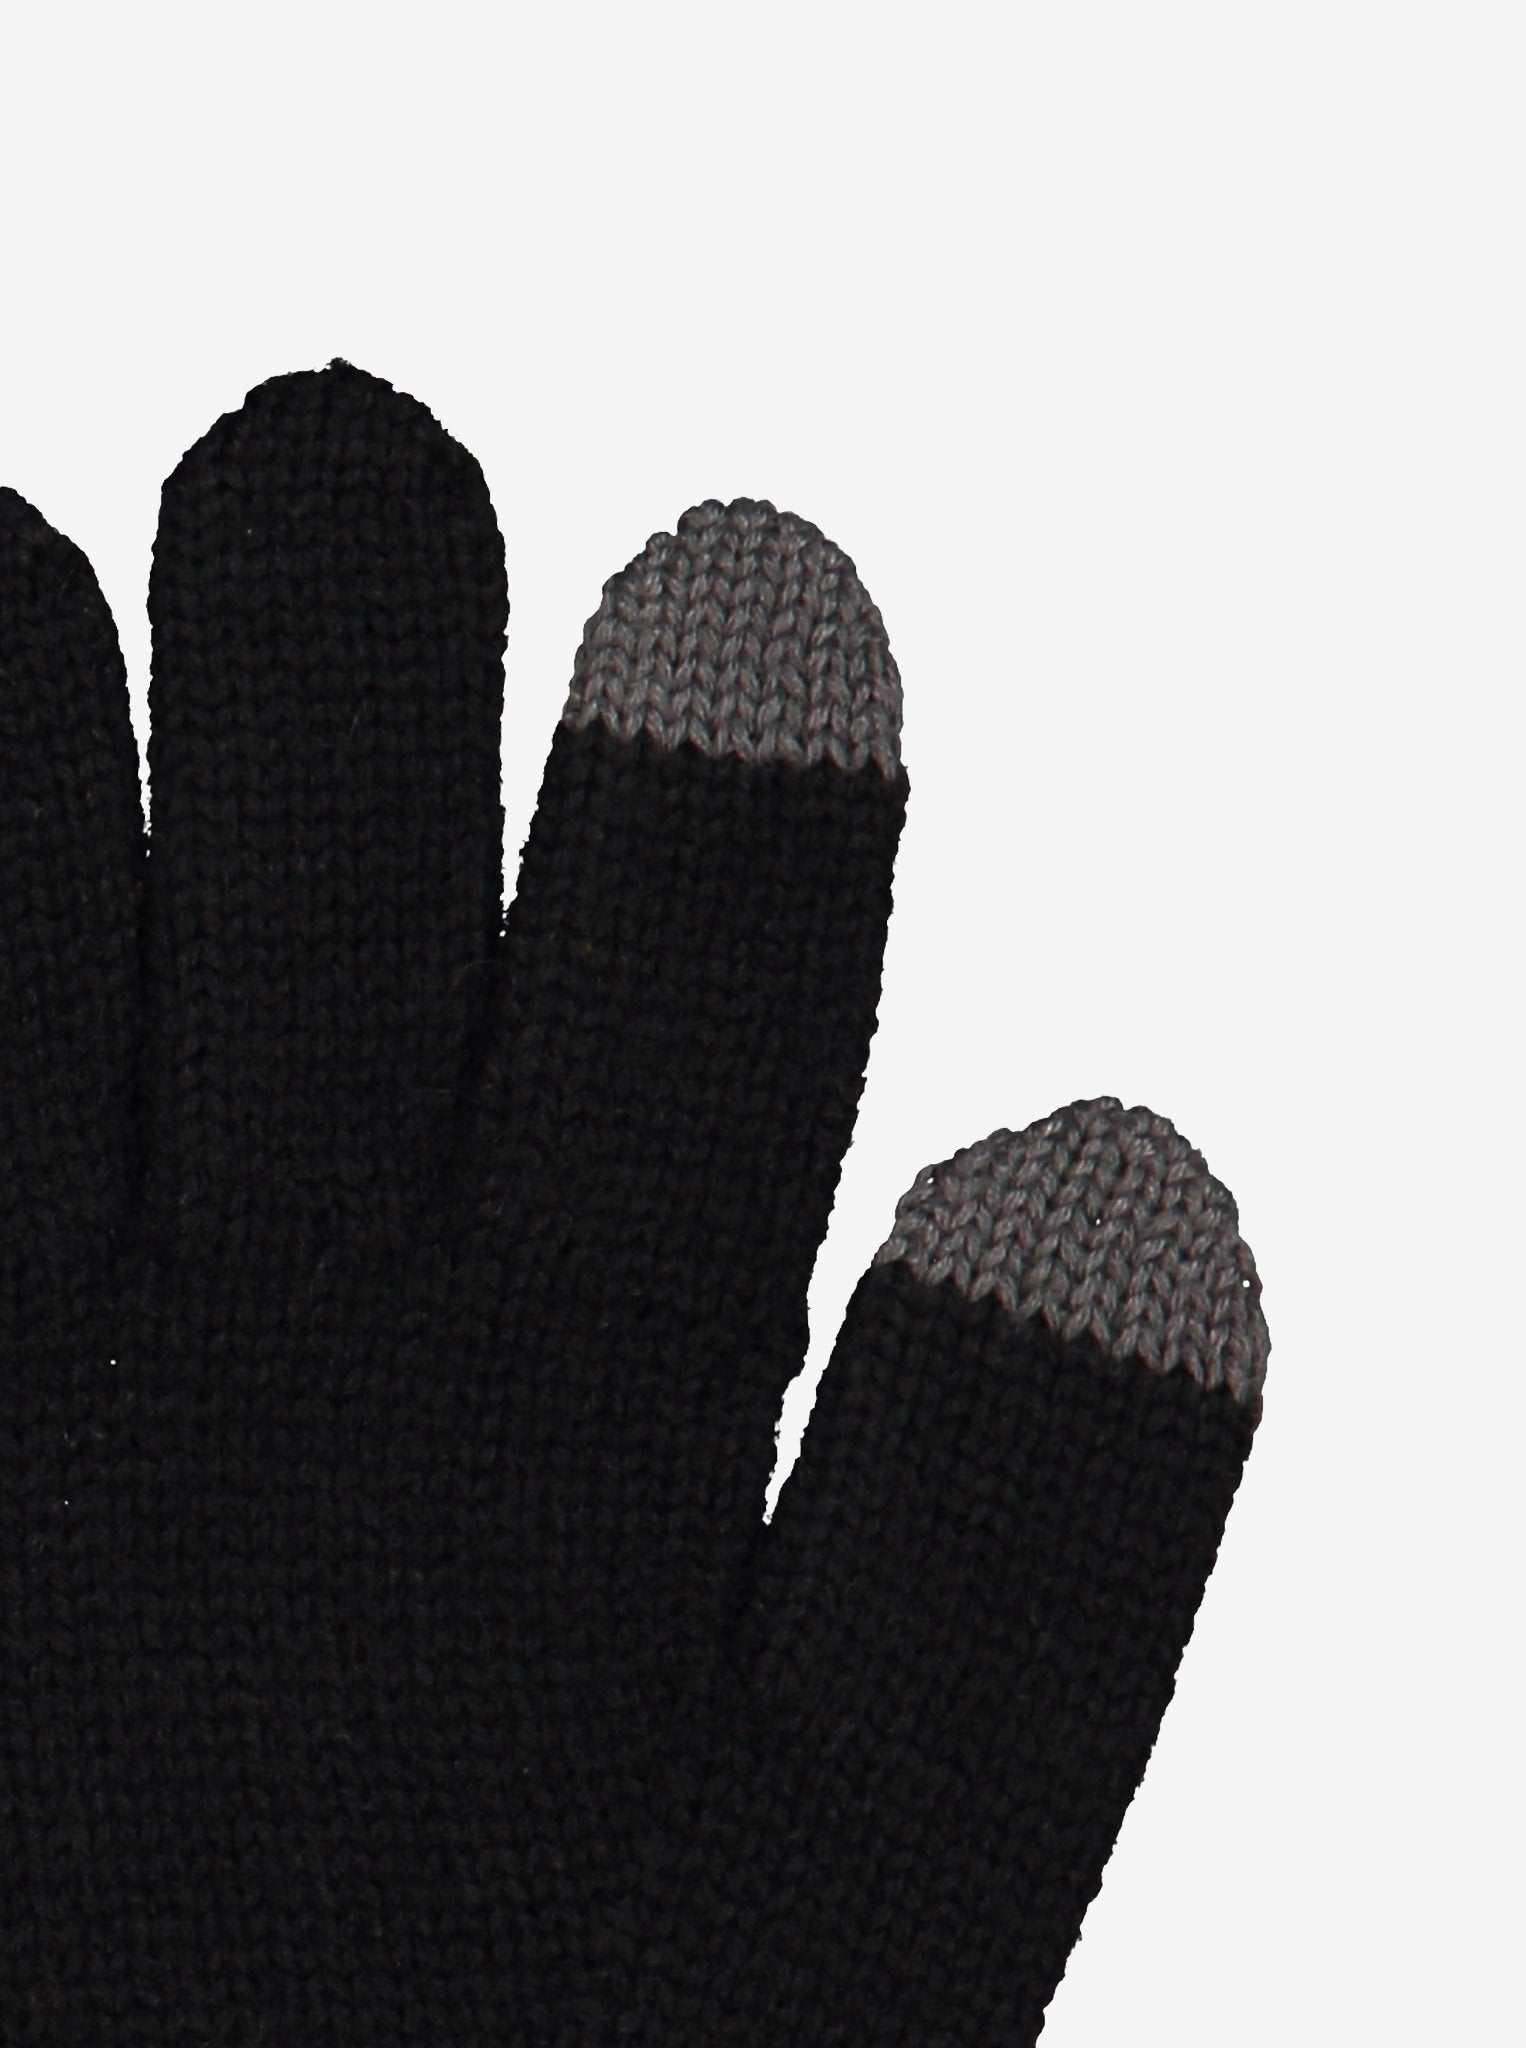 kids black touch screen gloves, warm and druable, ethical polarn o. pyret